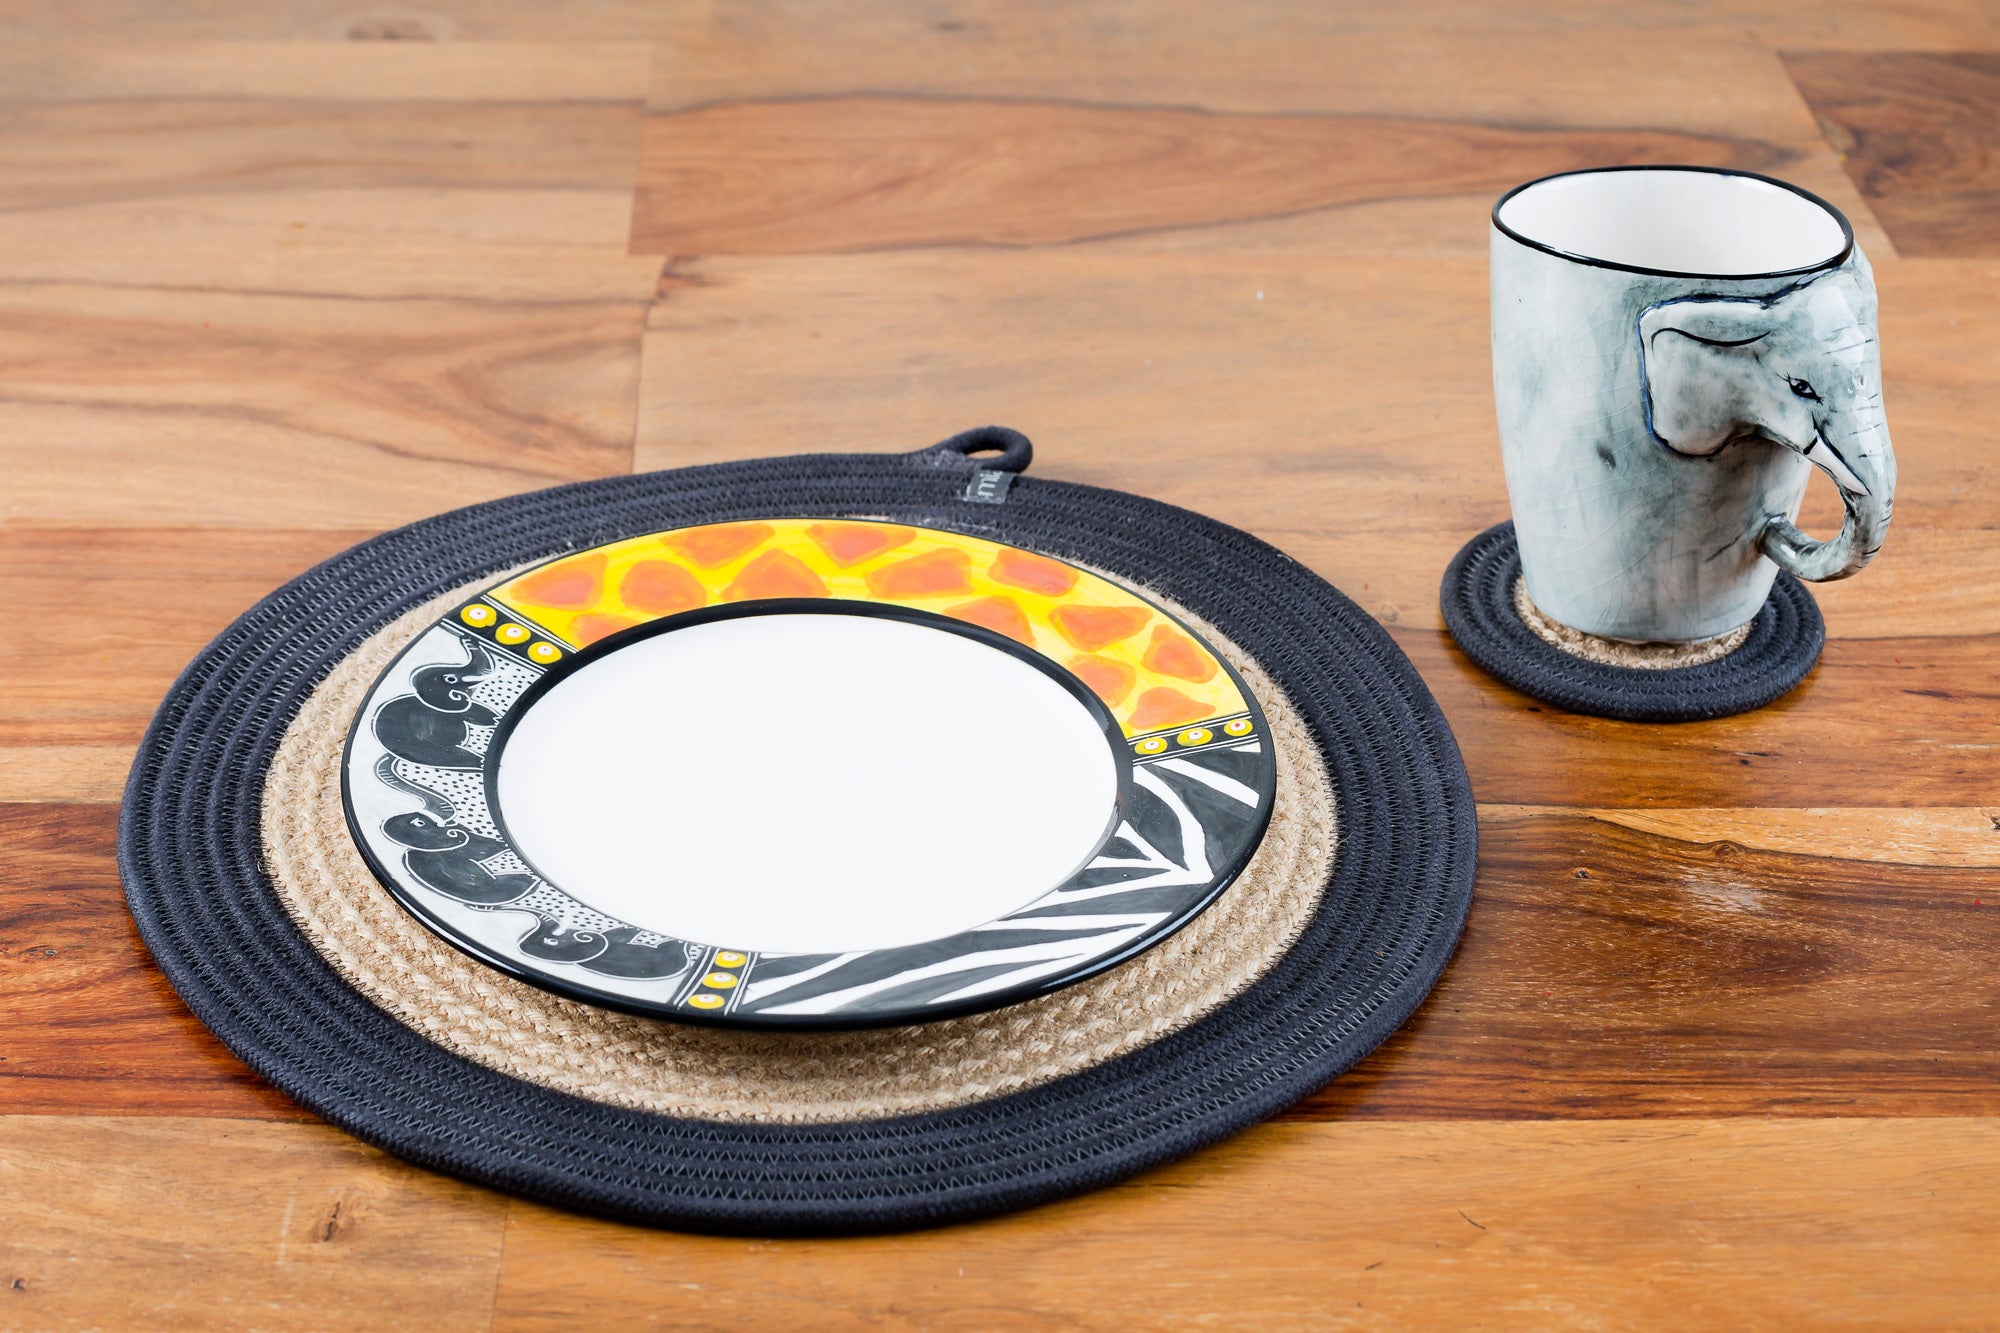 Whimsy Animal print side plate! White plate with the rim painted in zebra & giraffe print and three small elephants in a line on a woven place mat on a table.  Along side is the Elephant mug on a woven coaster. Great fun pair!